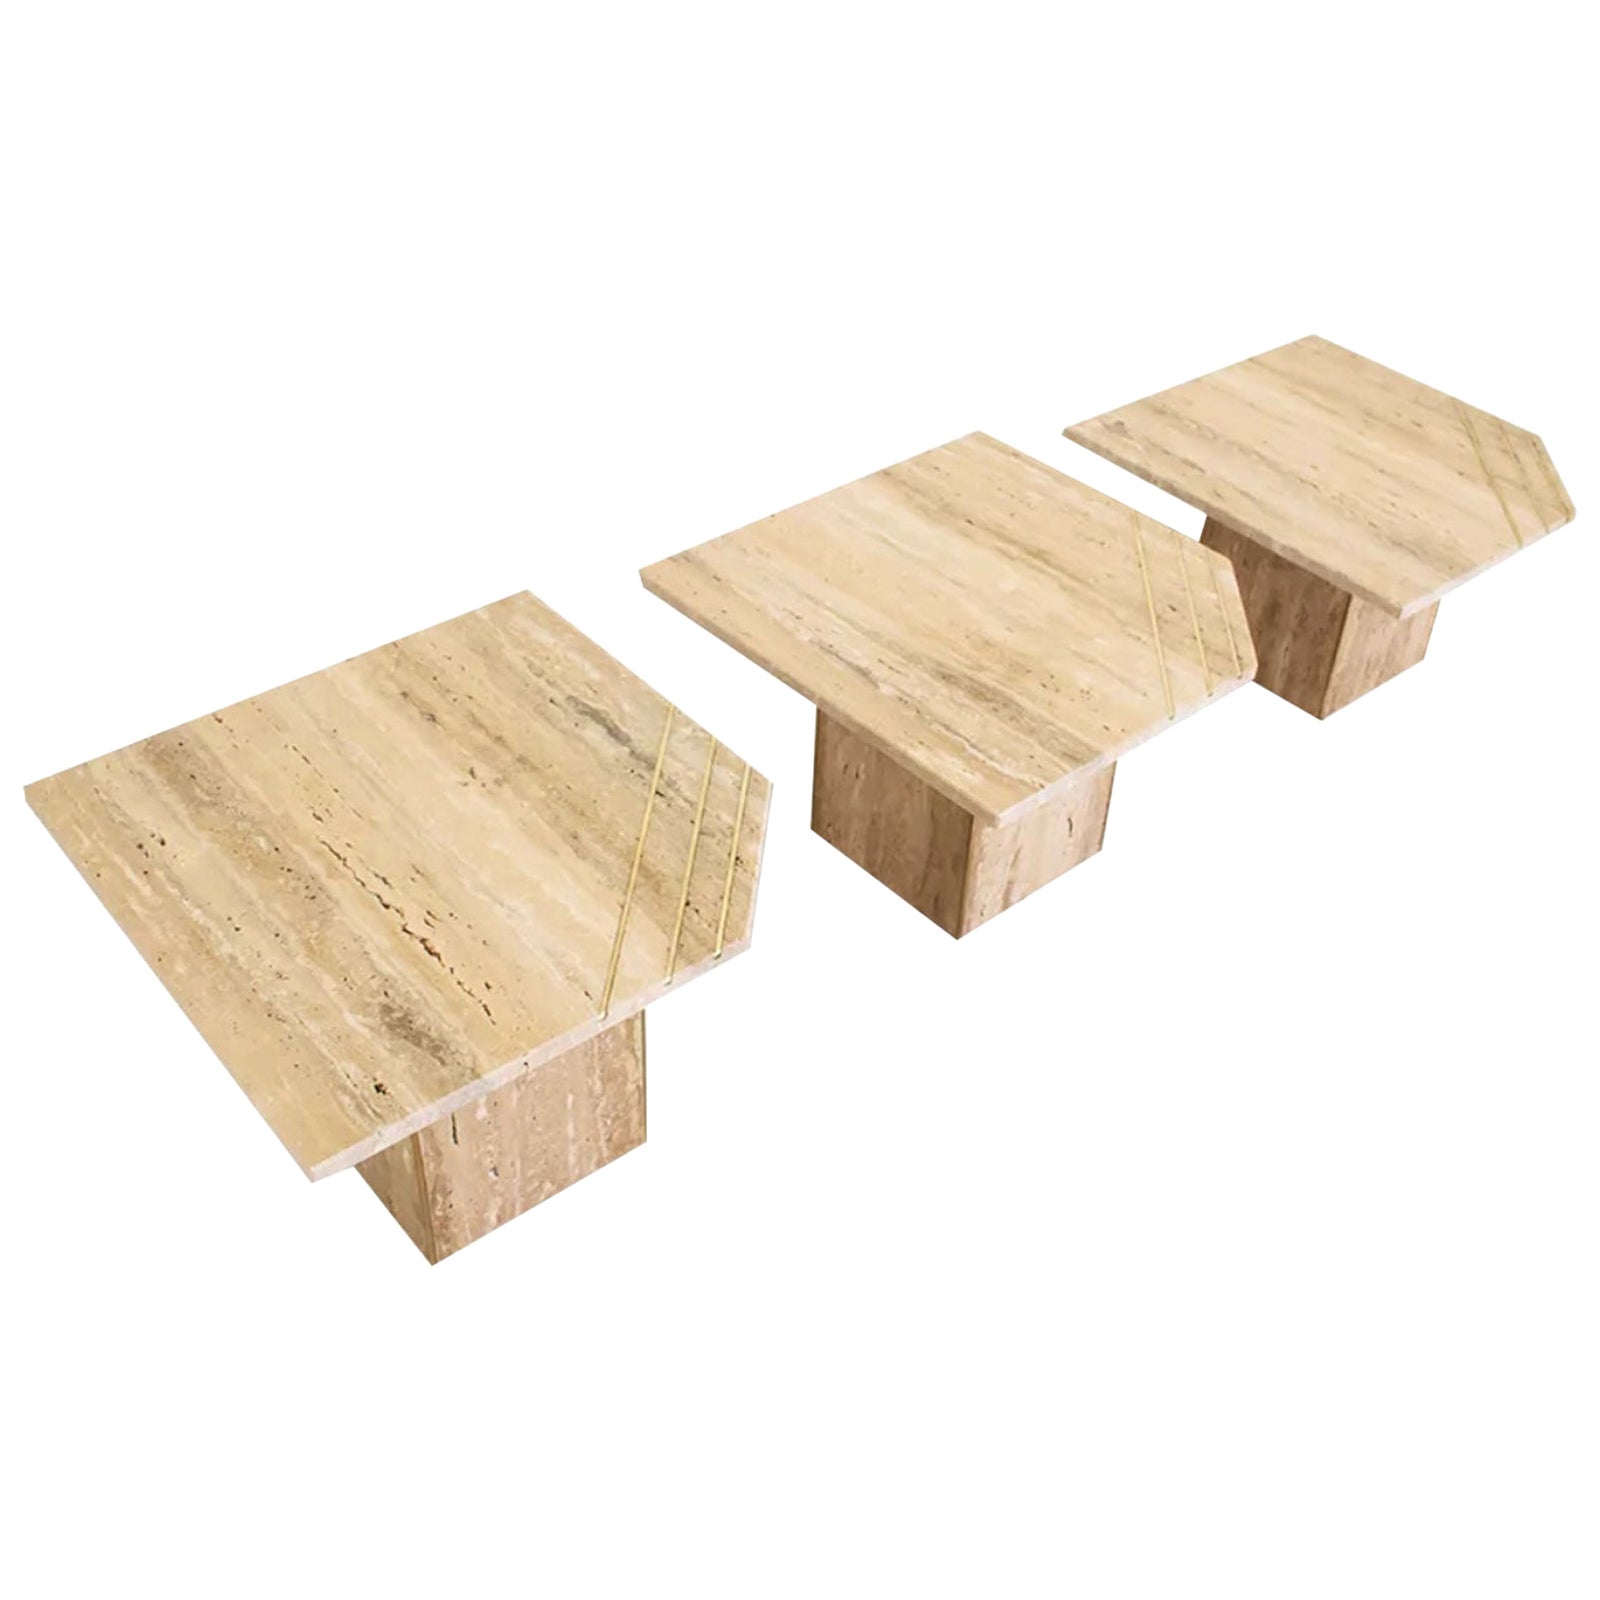 Italian Contemporary Modern Travertine Nesting Tables Set with Brass Insets